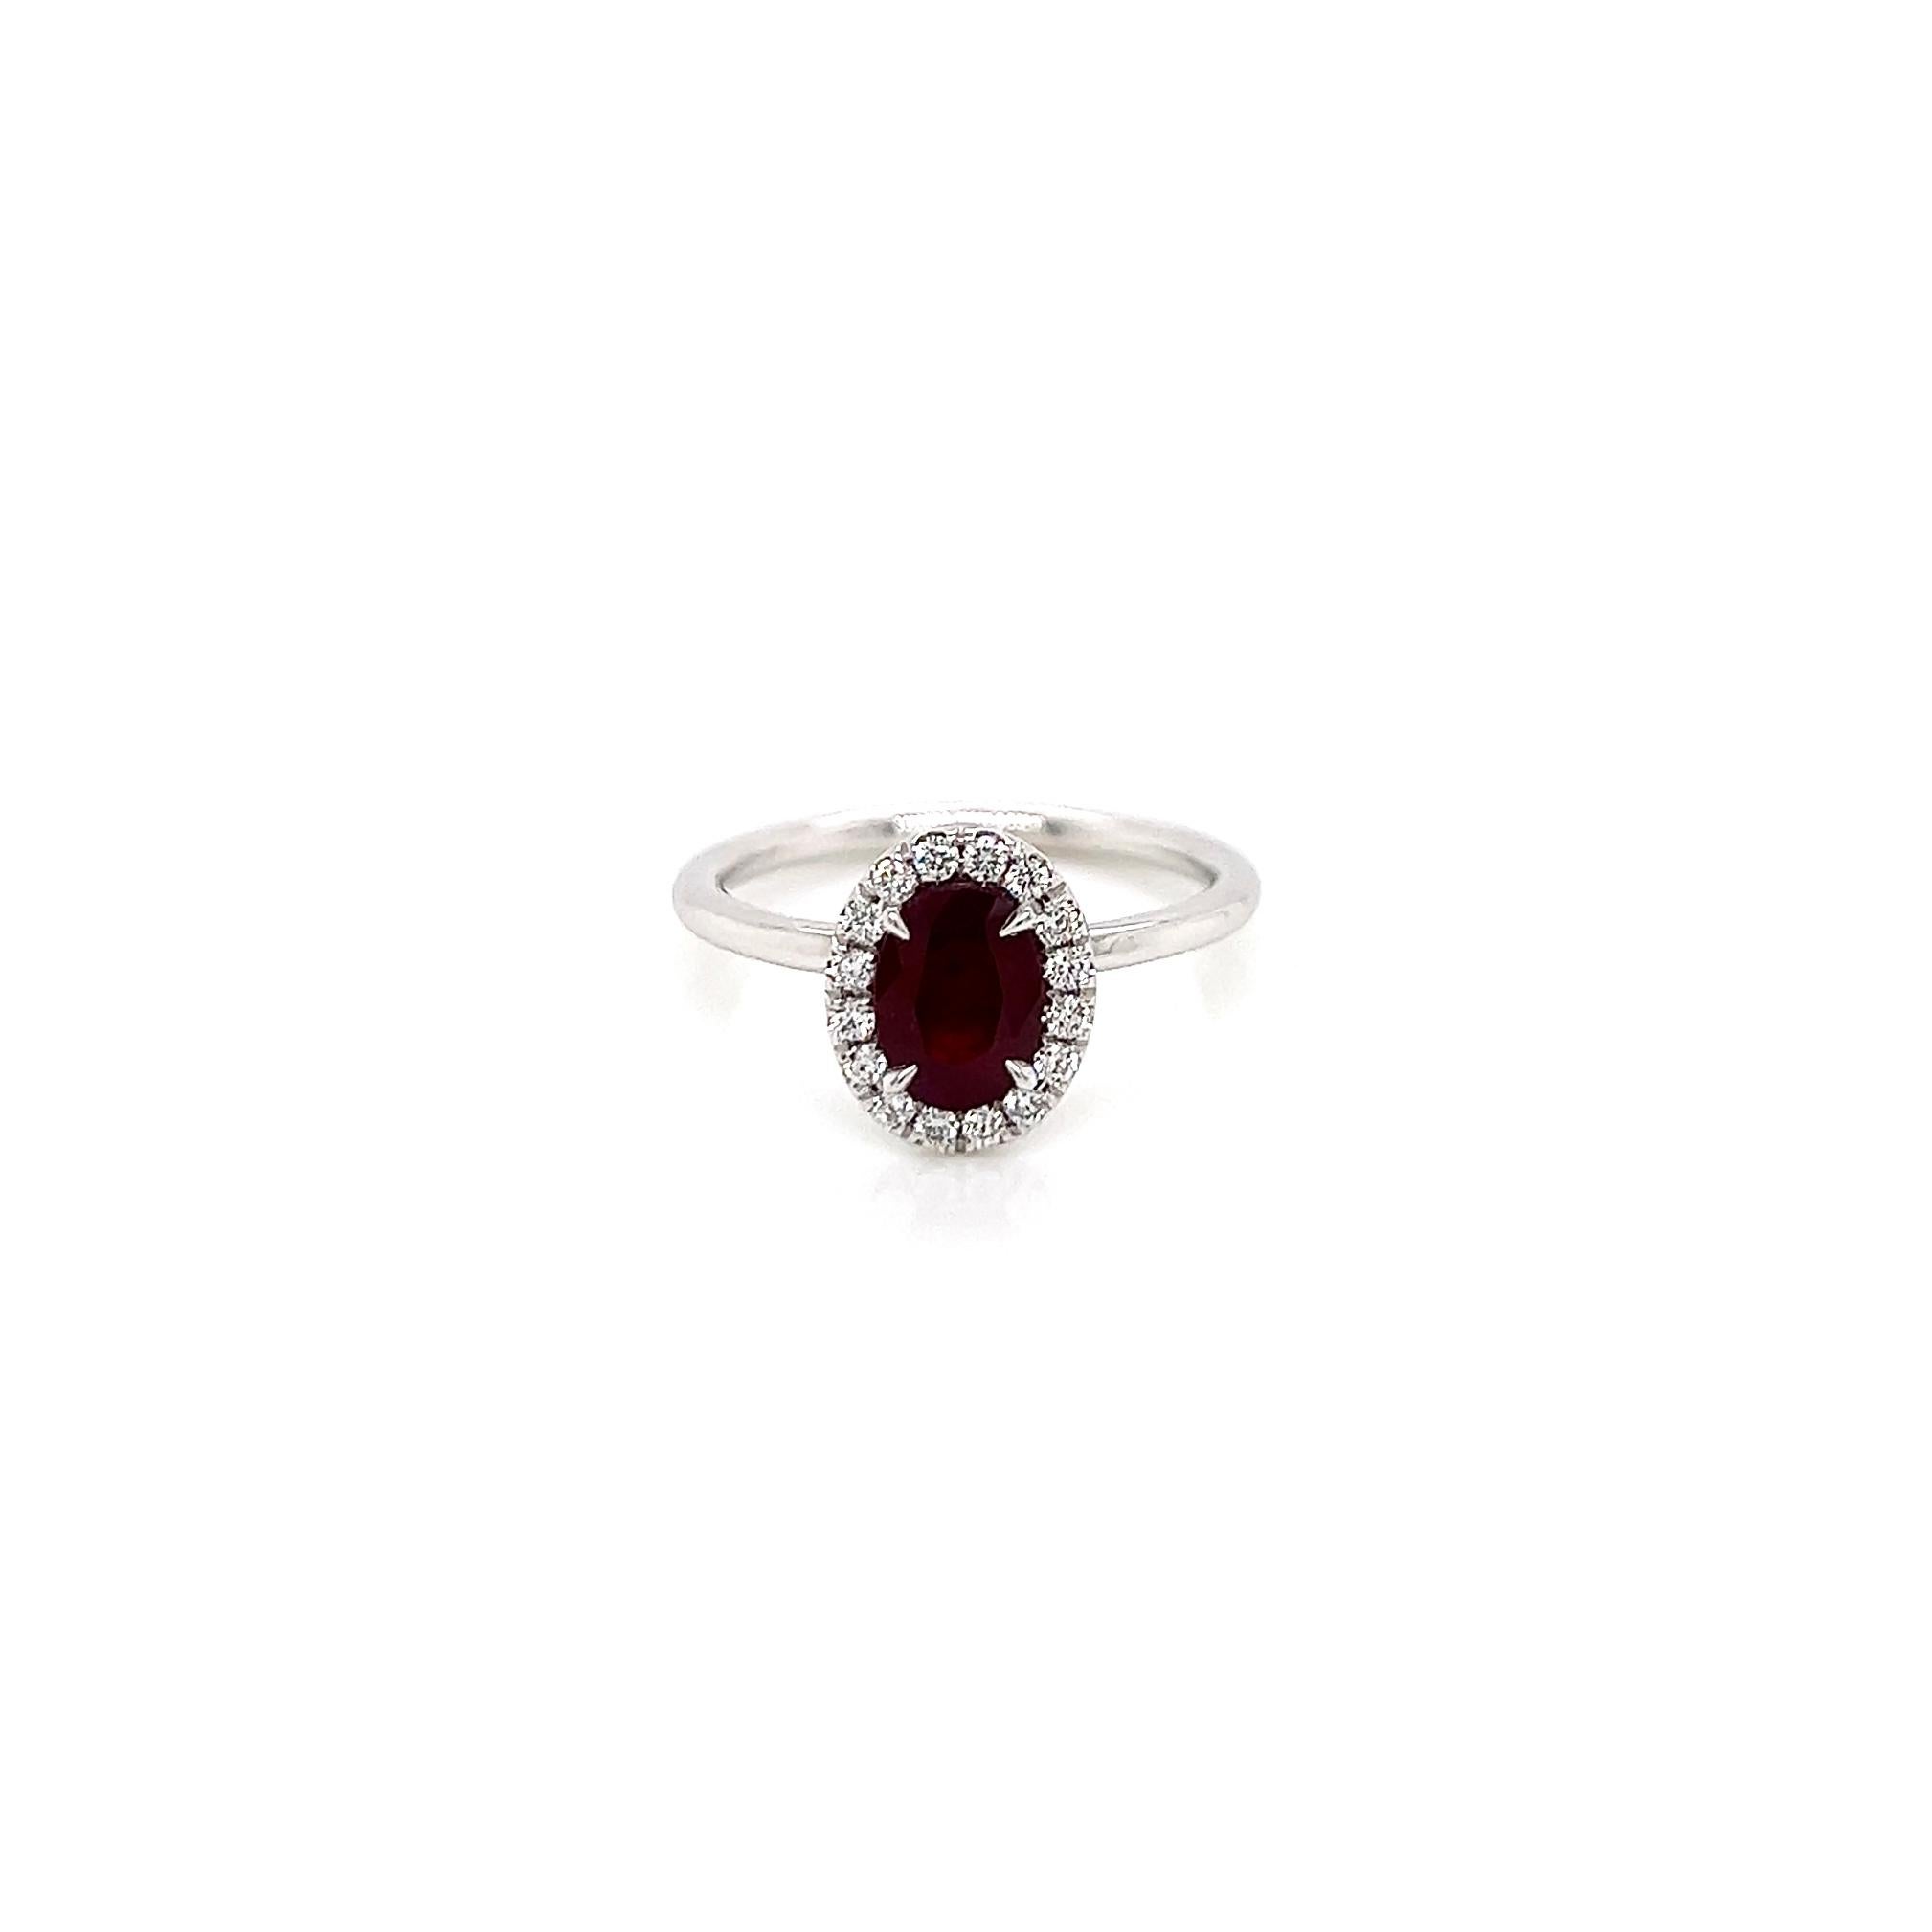 0.89Carat Ruby and Diamond Ladies Ring

-Metal Type: 18K White Gold
-0.89Carat Oval Cut Ruby
-0.29Carat Round Side Natural Diamonds
-Size 6.0

Made in New York City